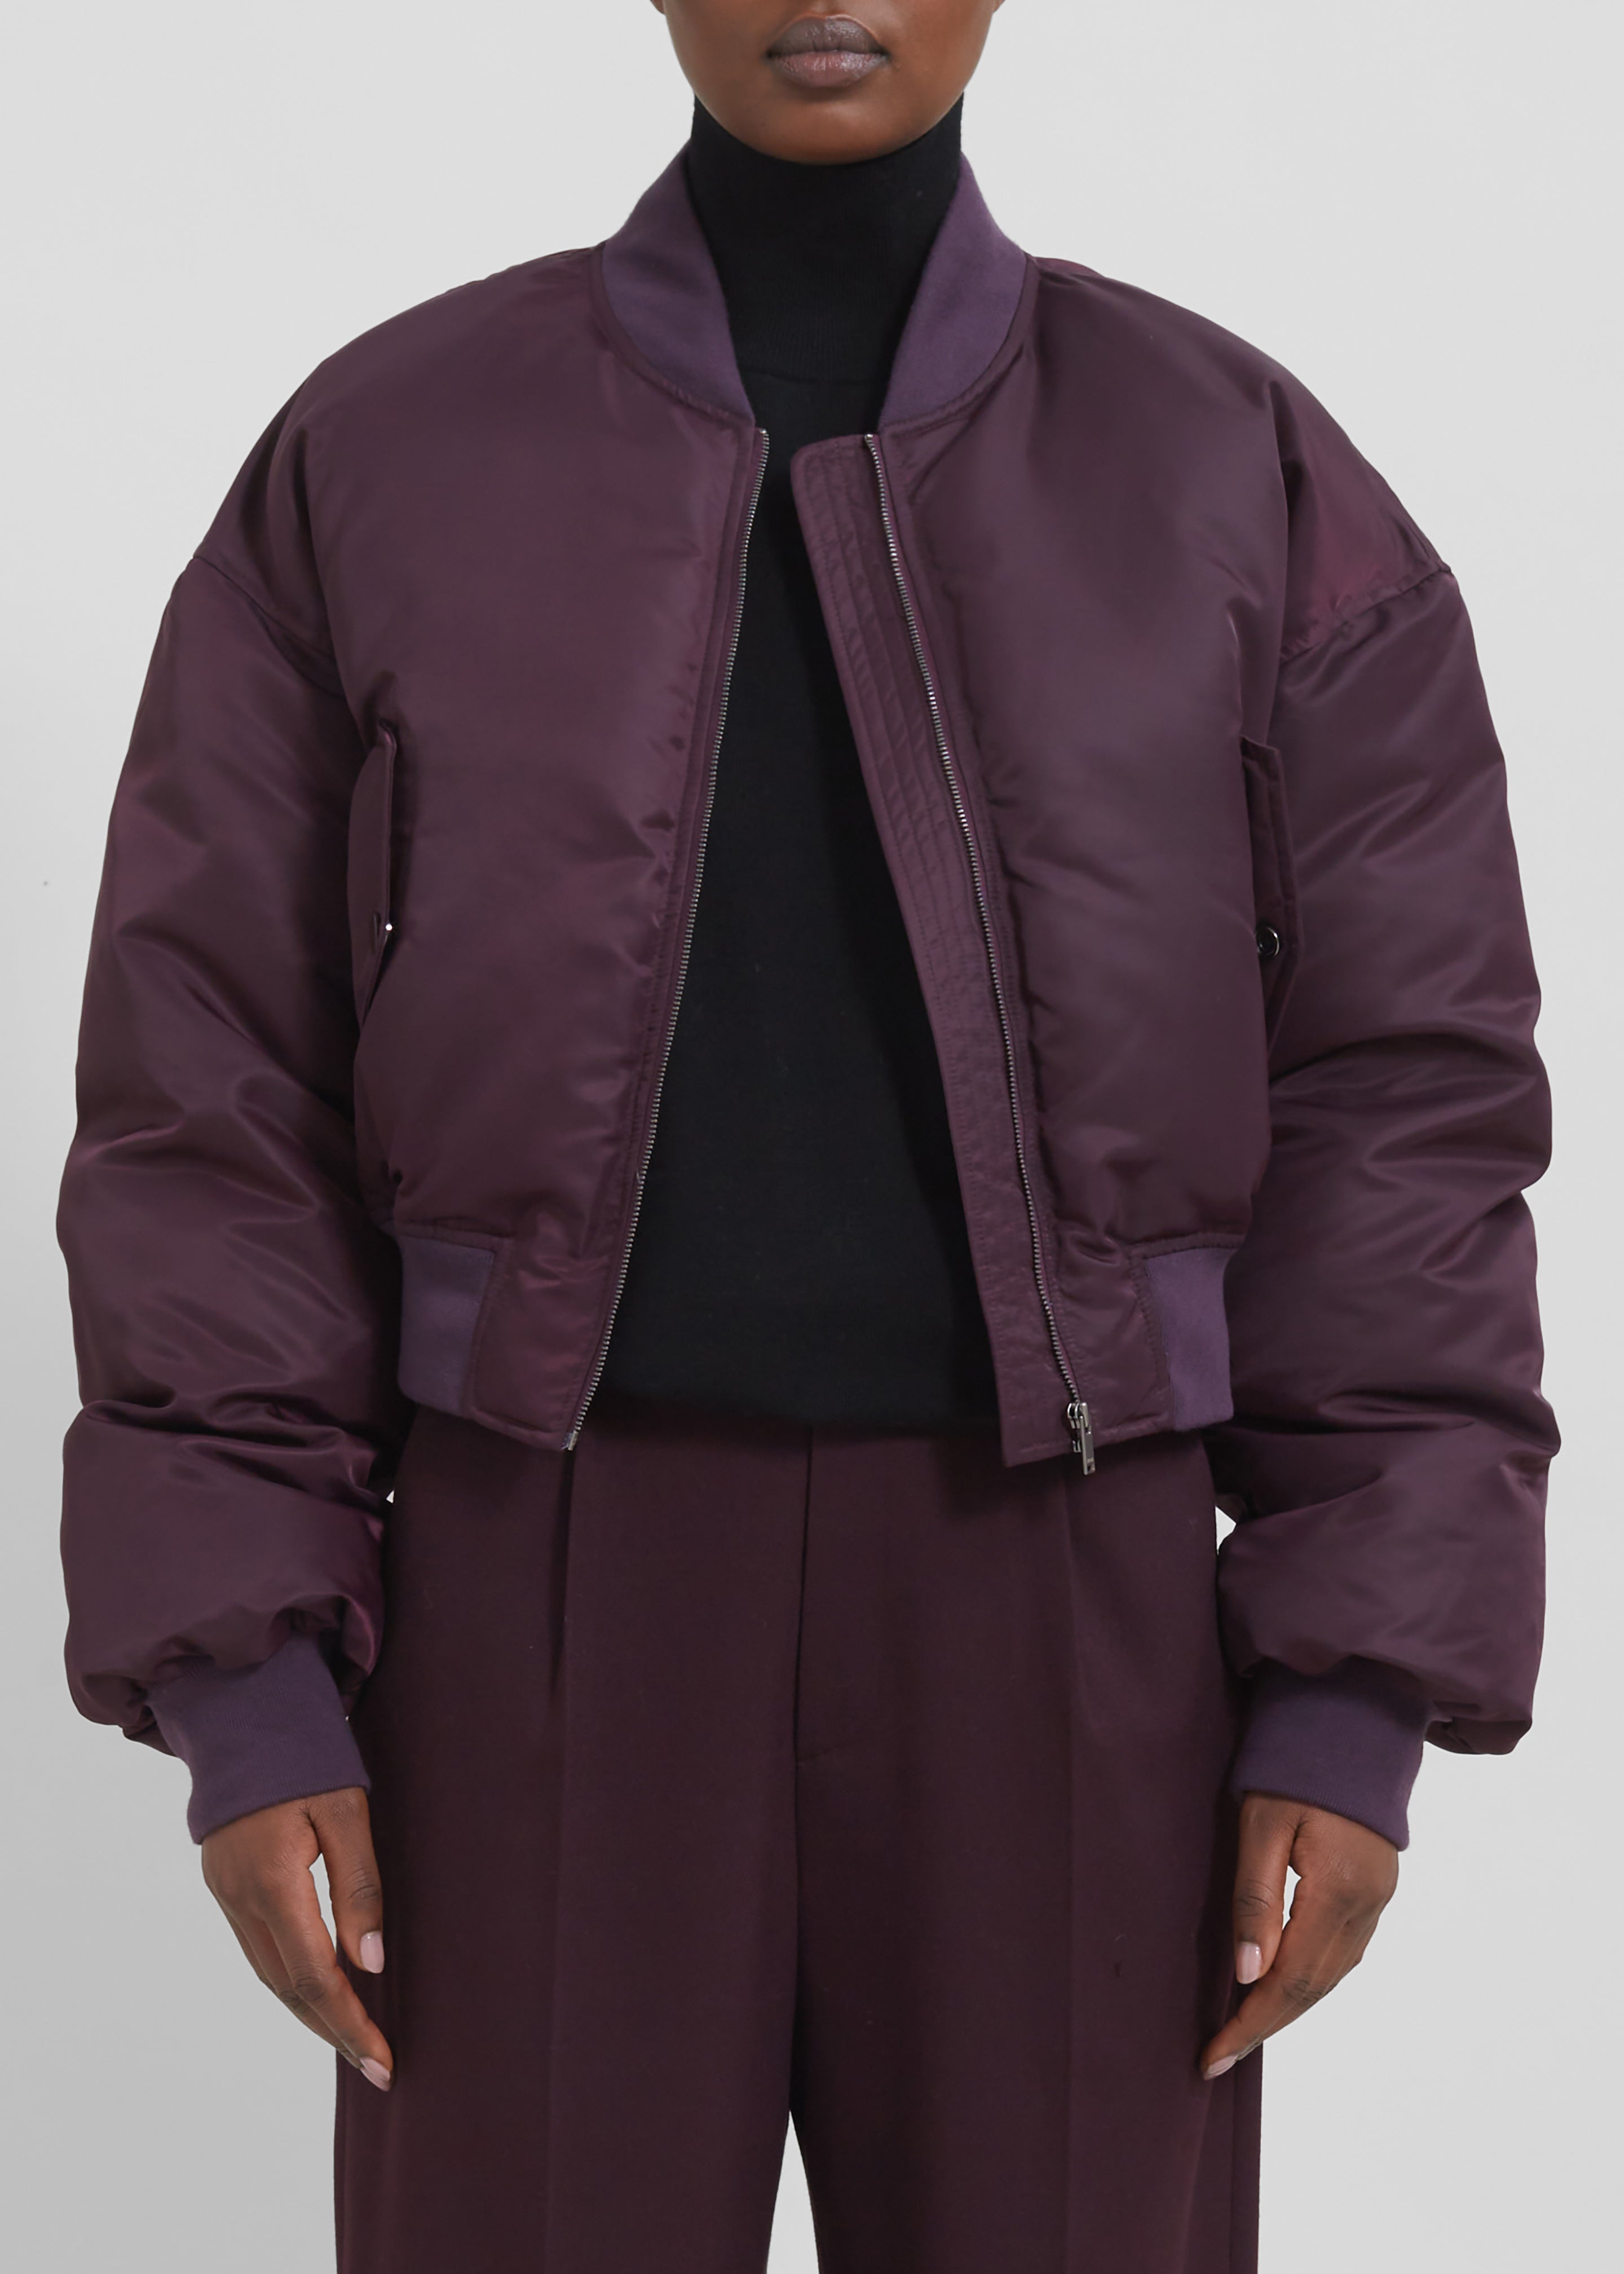 Houghton Cropped Bomber - Prune - 5